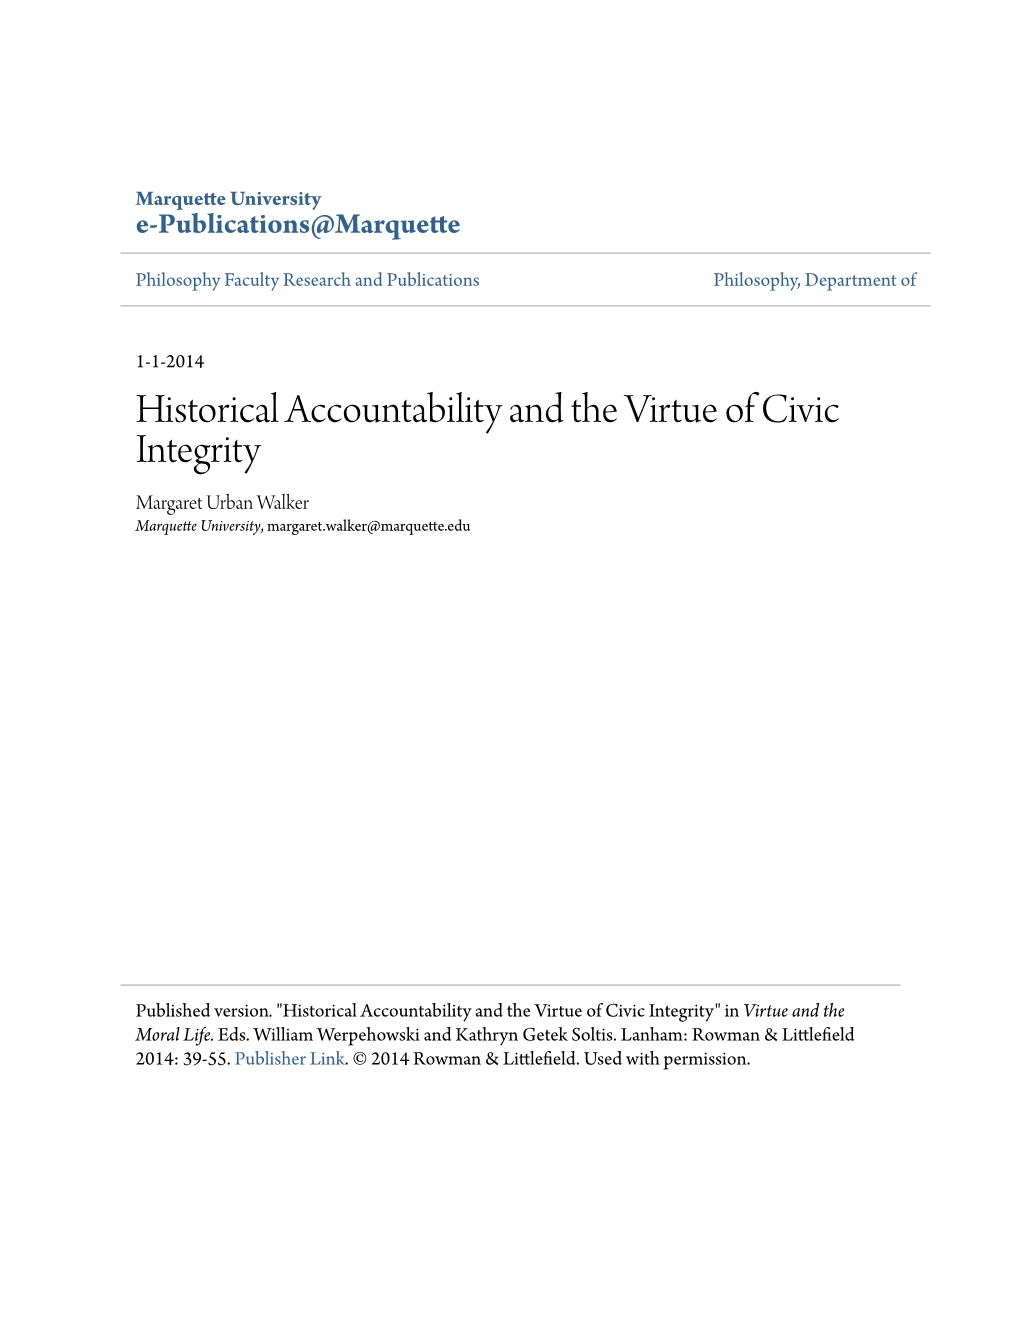 Historical Accountability and the Virtue of Civic Integrity Margaret Urban Walker Marquette University, Margaret.Walker@Marquette.Edu